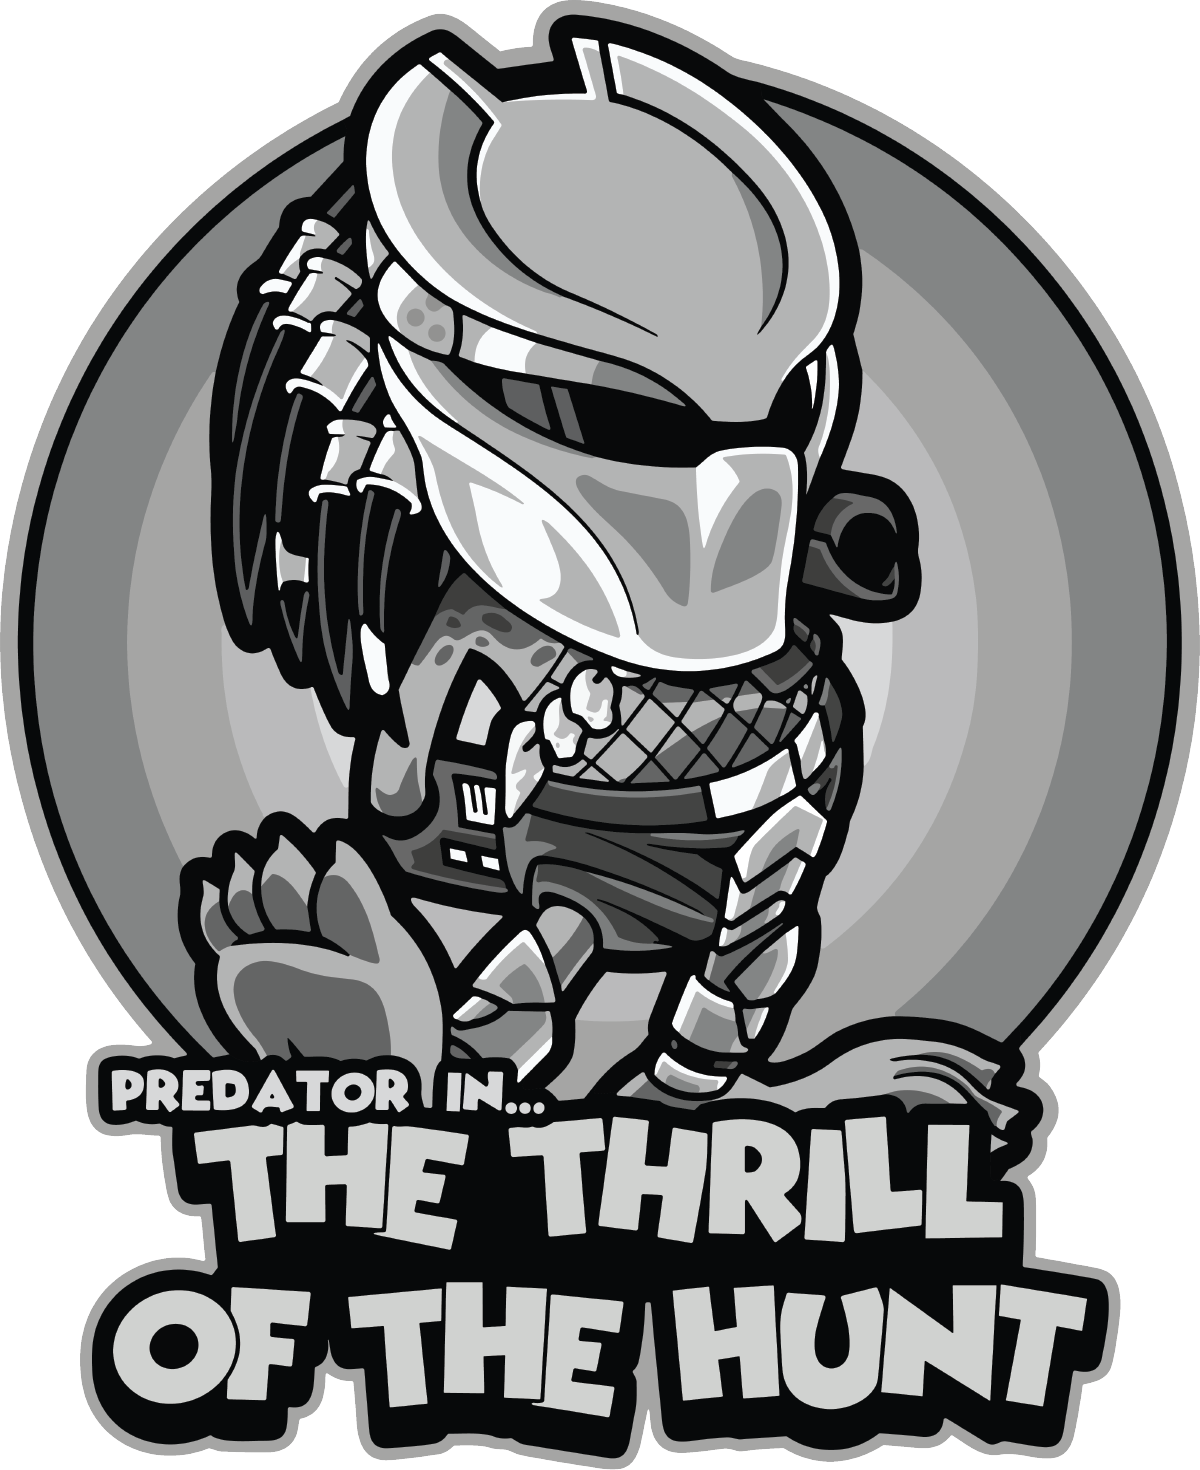 The Predator The Thrill of the Hunt